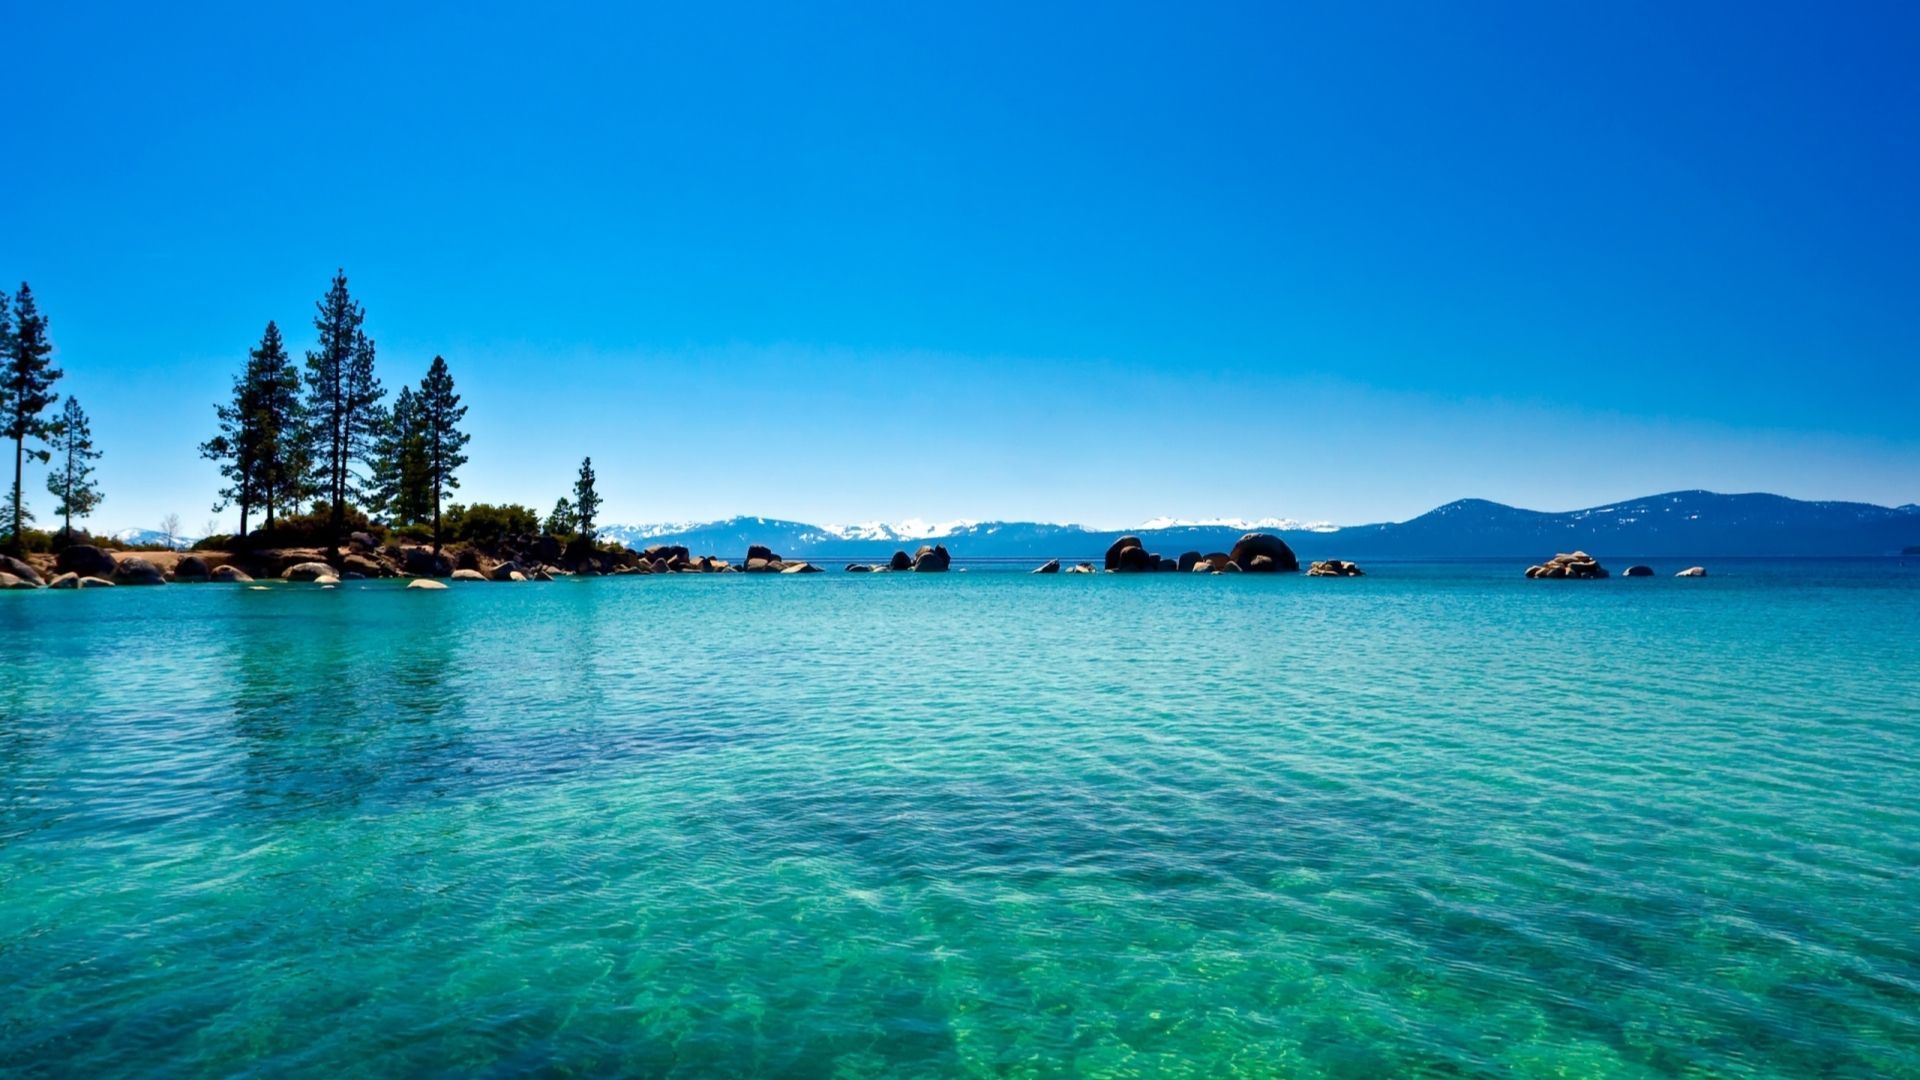 Lake Tahoe Wallpaper 1920 x 1080. Beautiful places in the world, Most beautiful places, Lake tahoe california